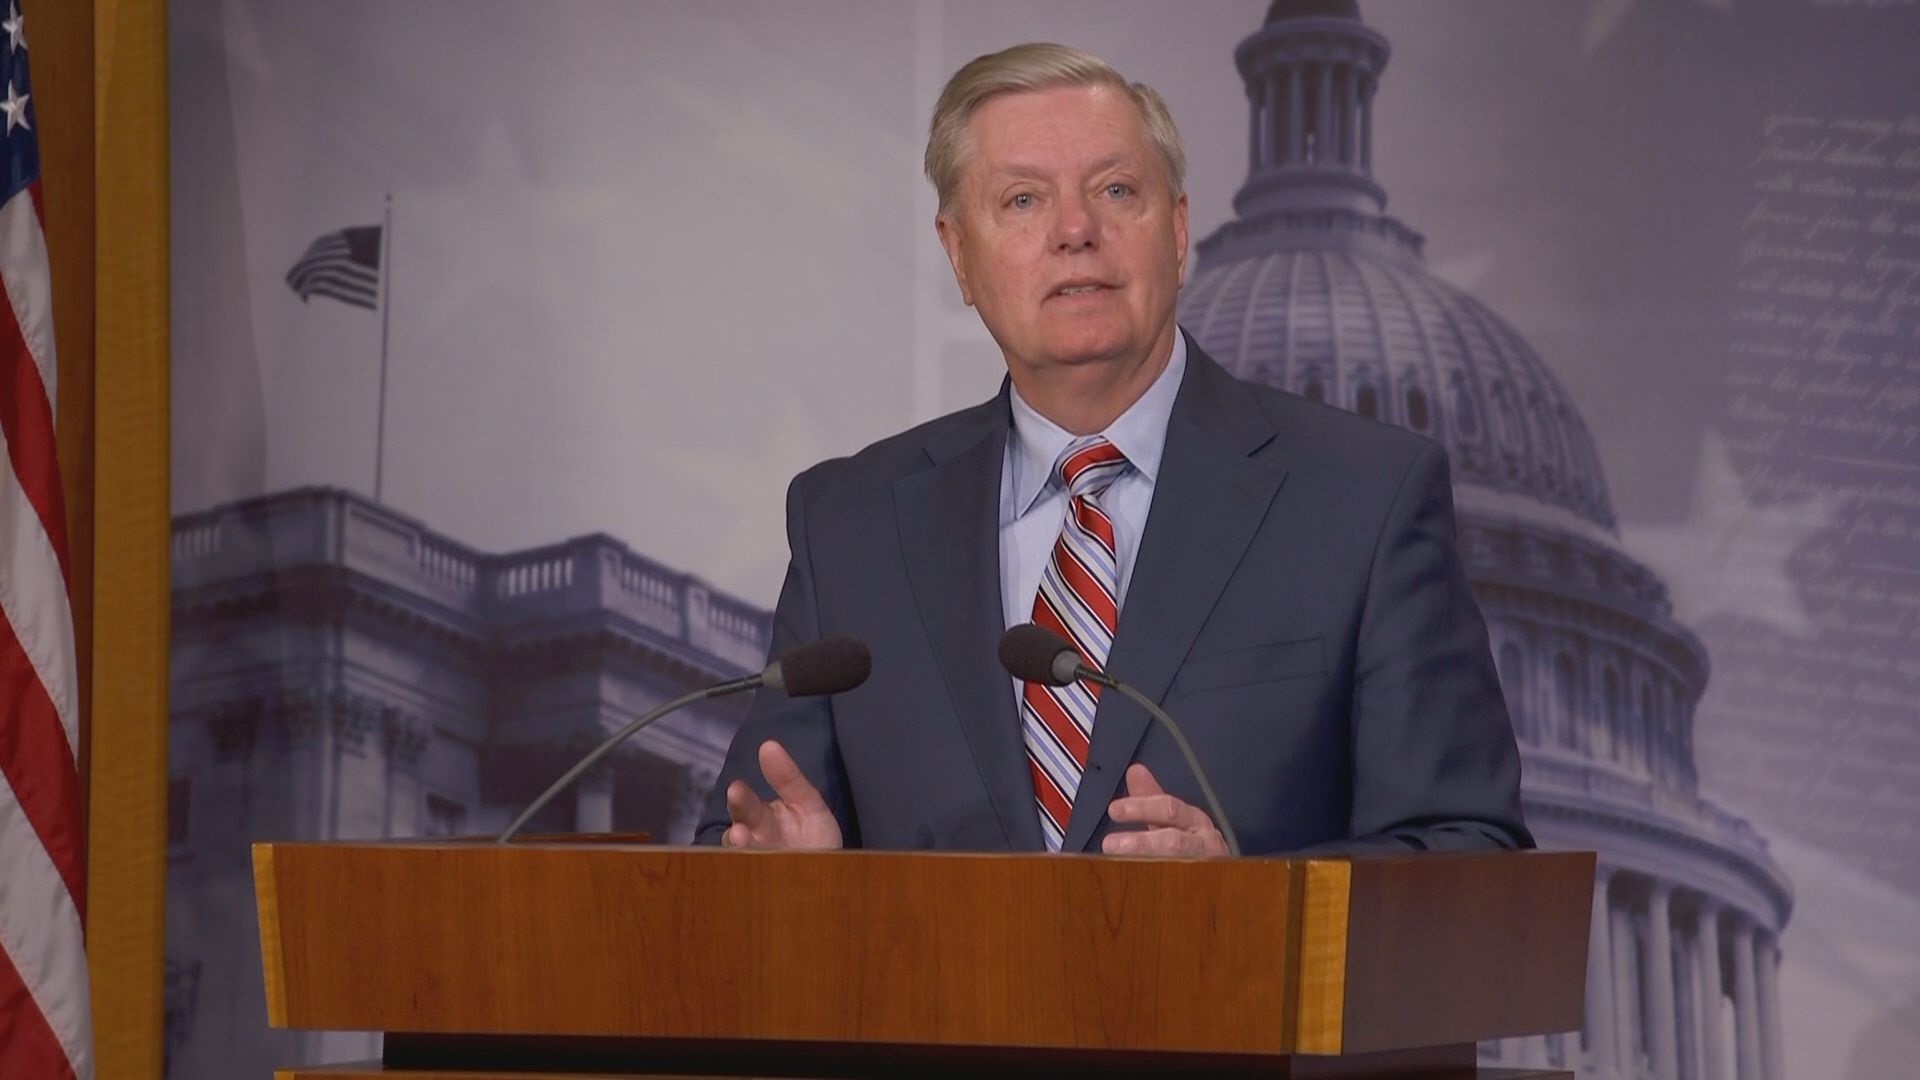 Lindsey Graham spoke a day after the conclusions of the Mueller report were released, which said there was no conspiracy between Russia, Donald Trump, and the Trump campaign.